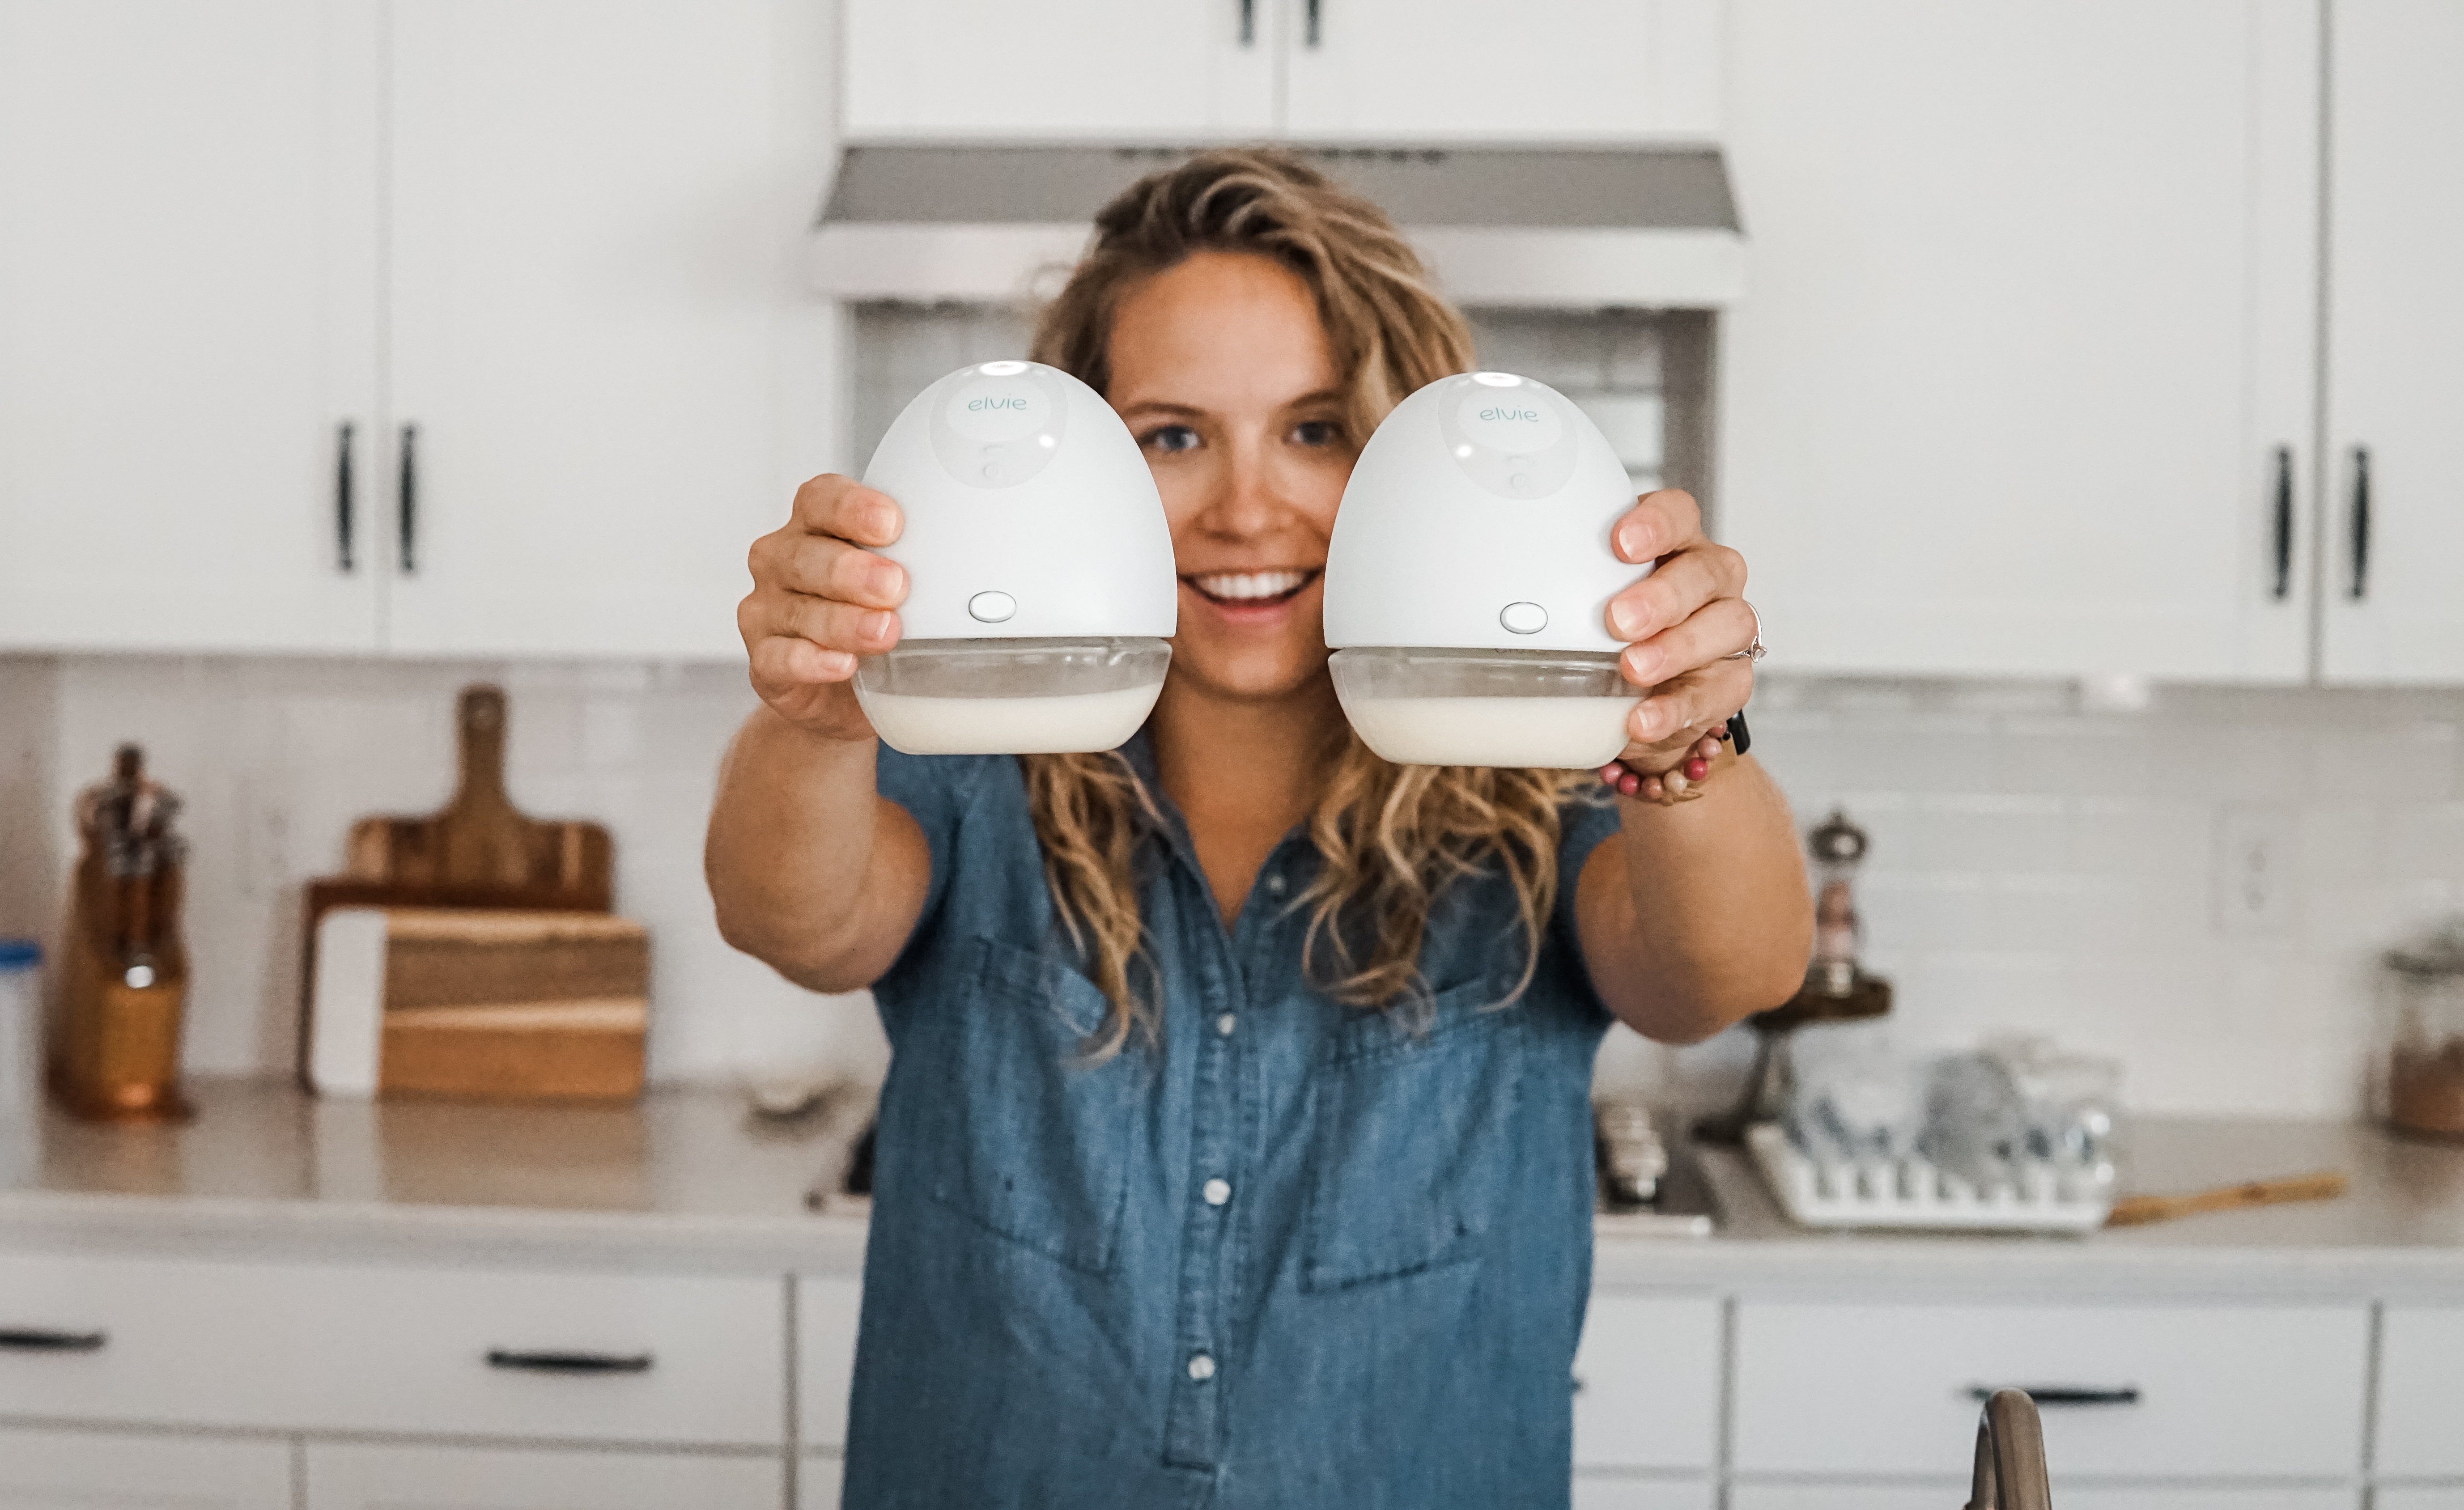 Why I Got The Elvie Breast Pump How I Ordered It With Tricare - Jordan Jean